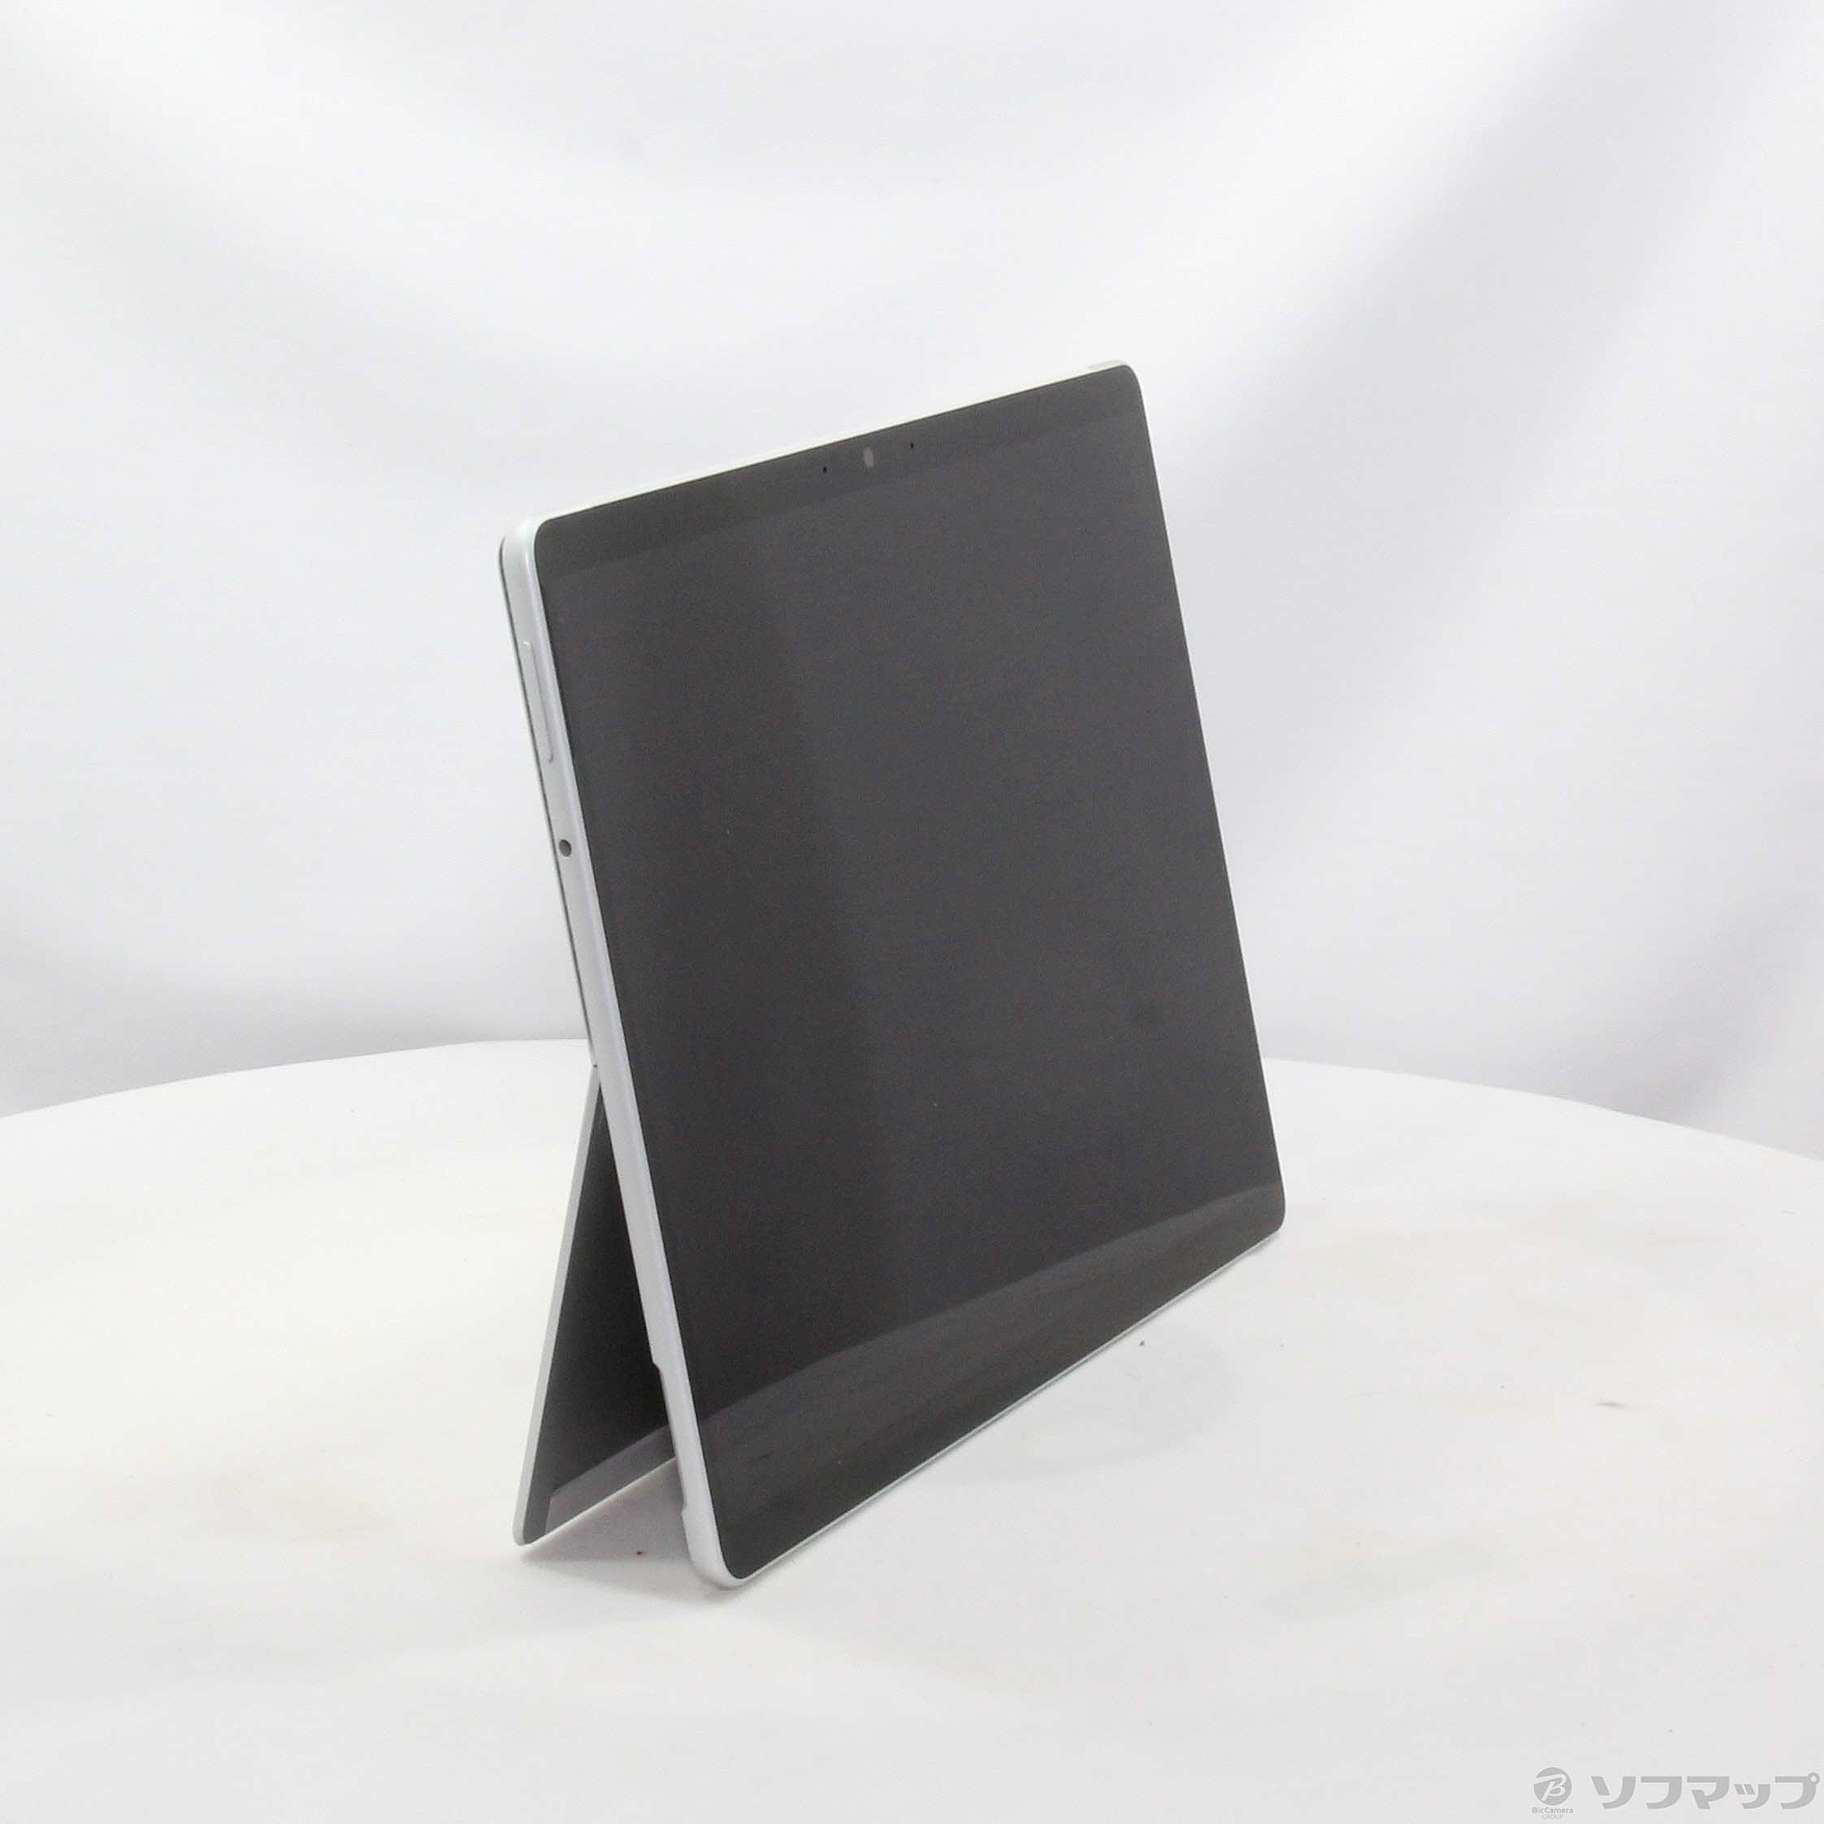 Surface Pro 8 IUR-00006 core-i5 8GB 128GB 中古美品 - タブレット